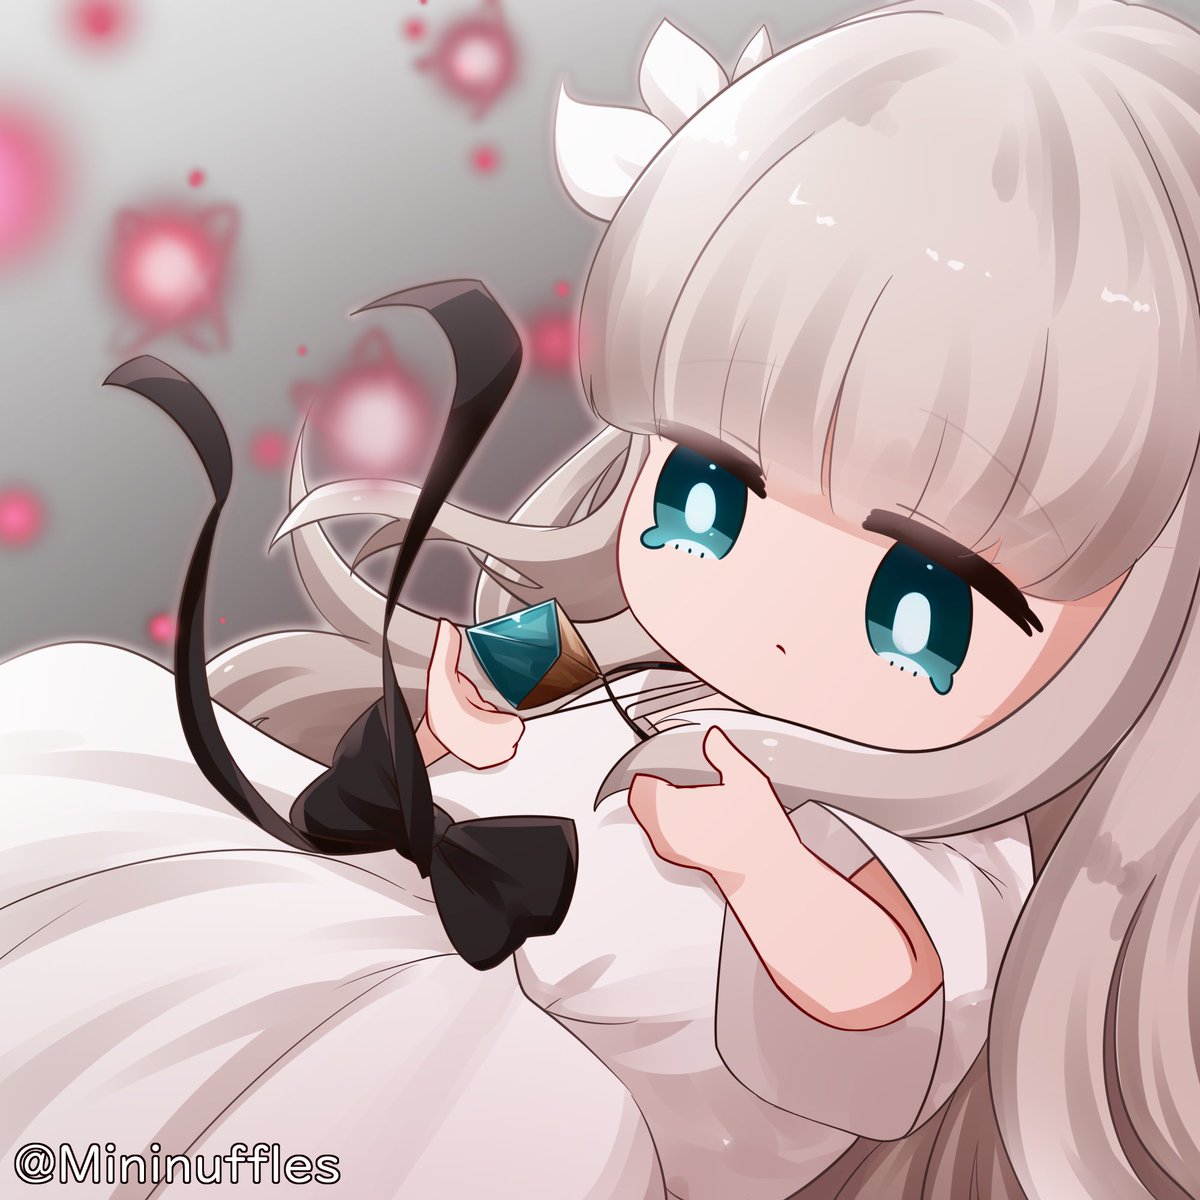 「Ender Lilies fanart! I recently complete」|Mininuffles | Commissions Open!のイラスト